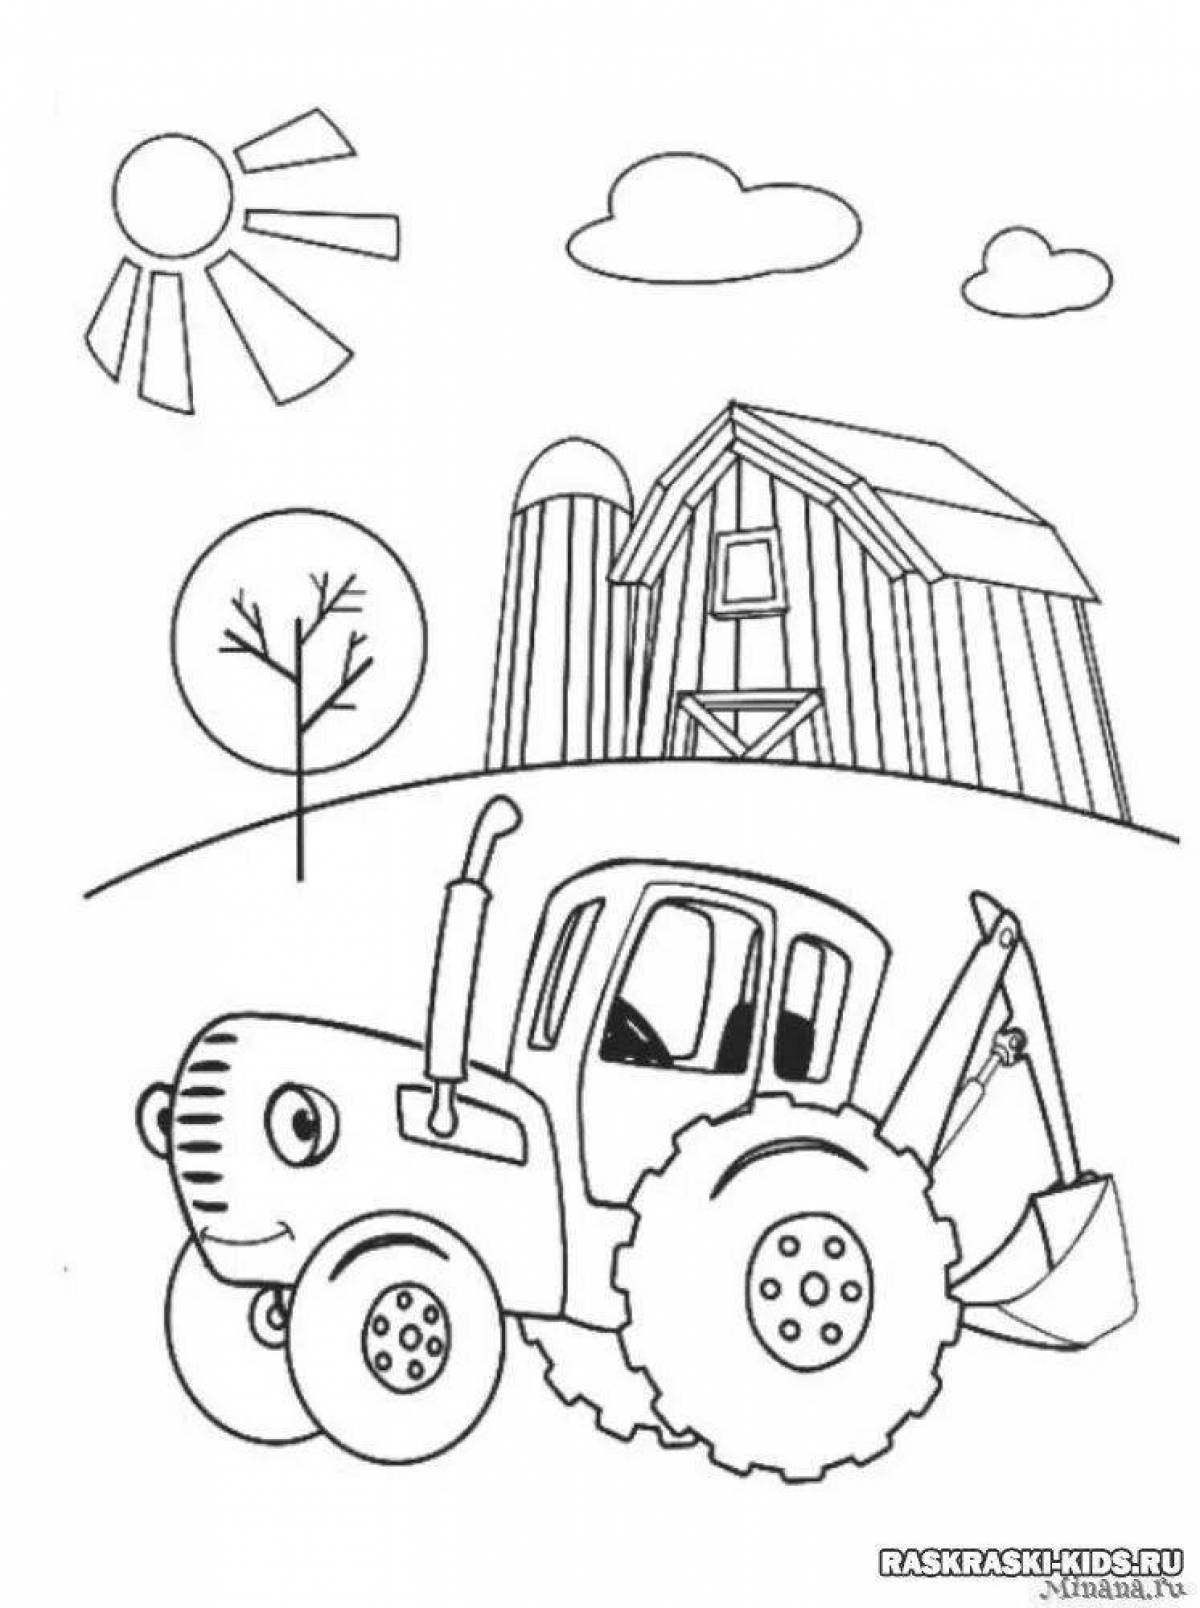 Amazing blue tractor coloring book for kids